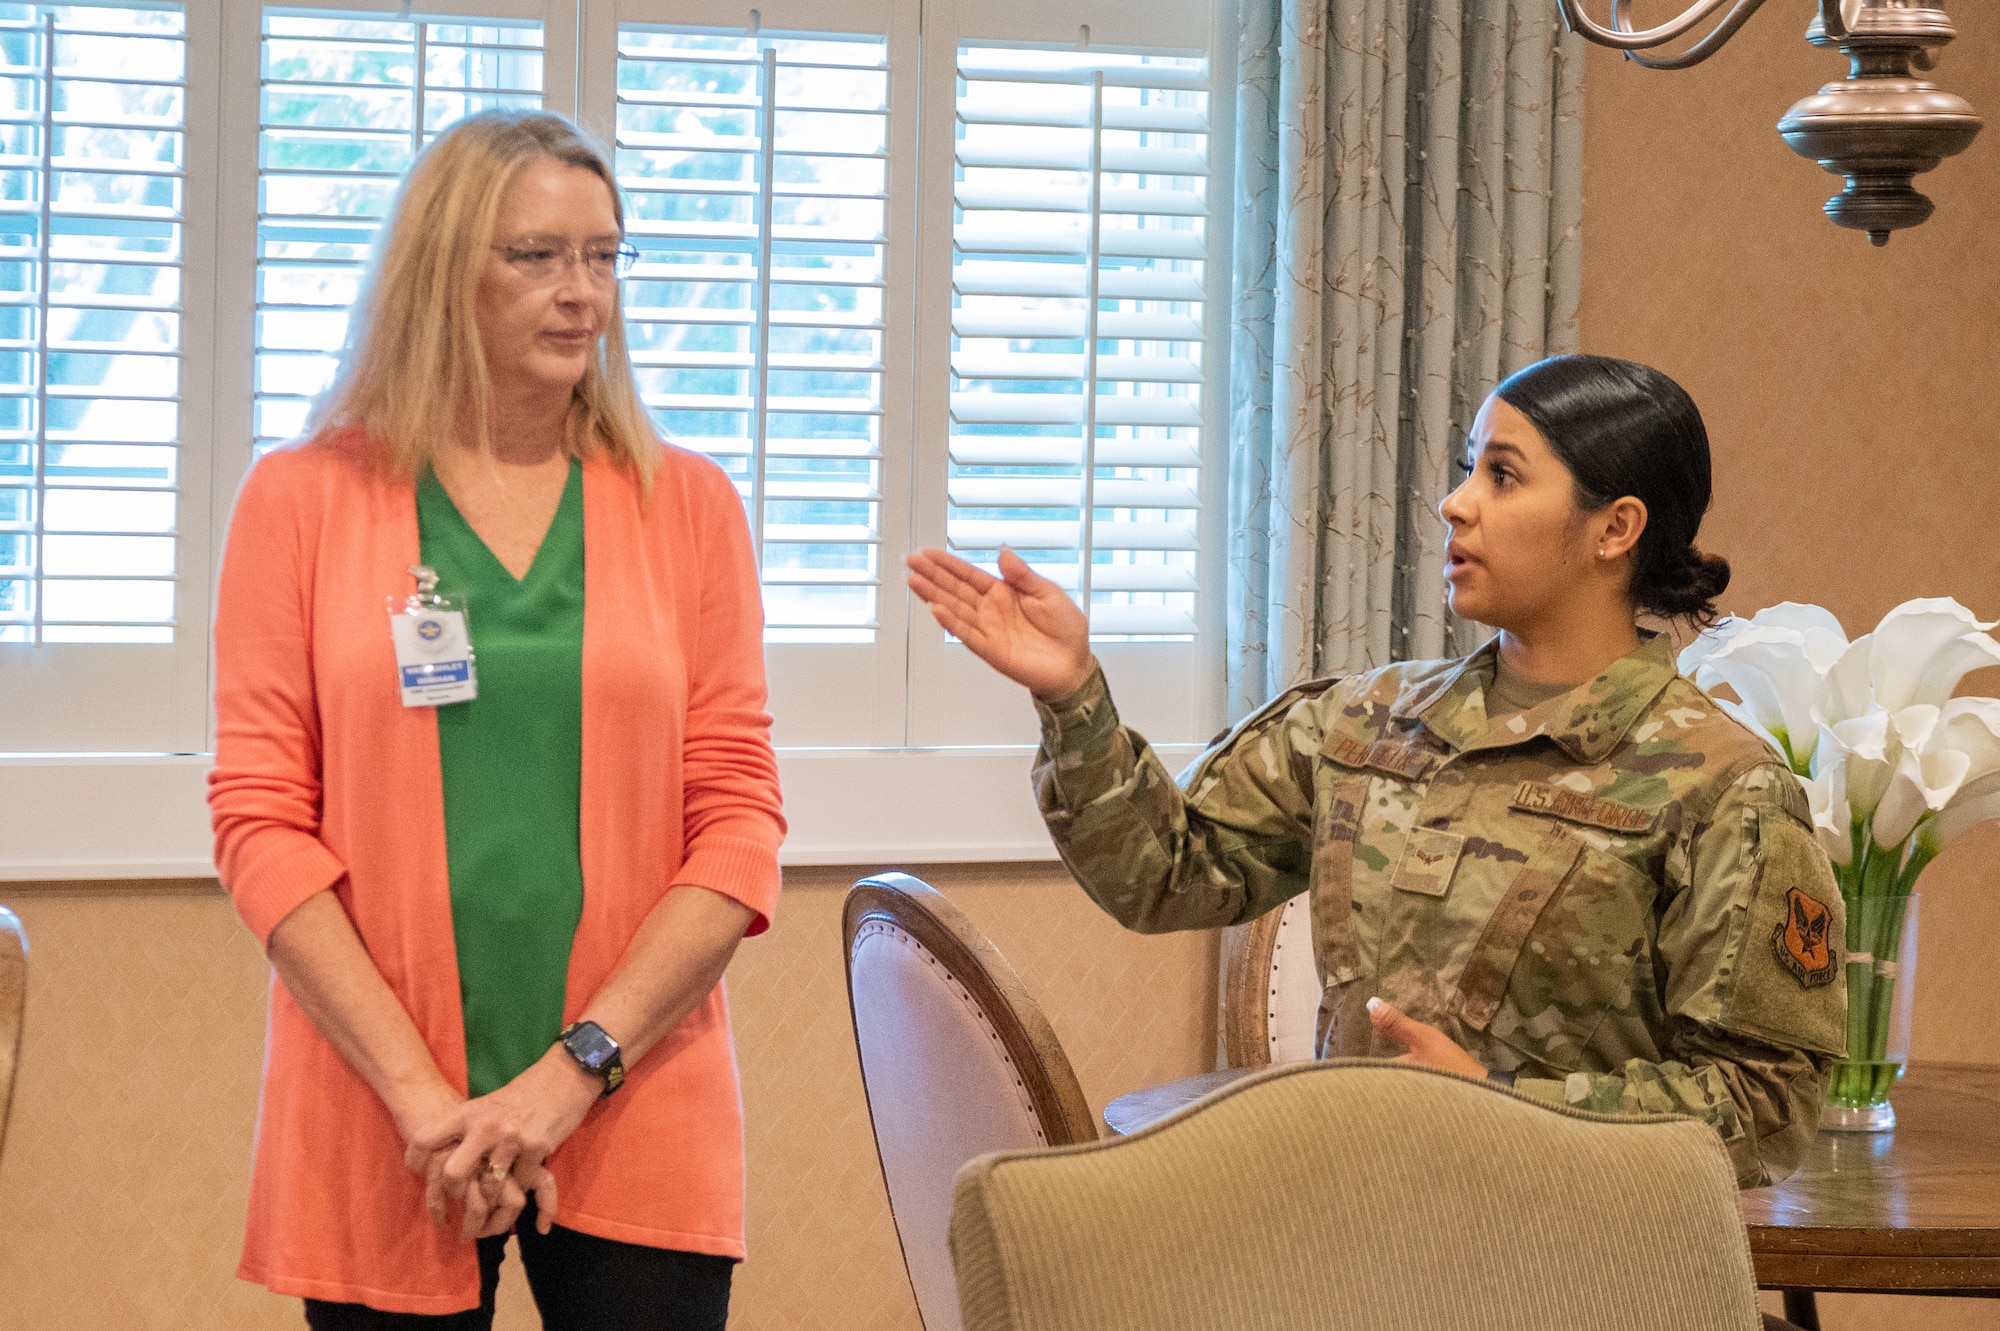 From the right, Airman 1st Class Angie Pena Felix, Air Force Mortuary Affairs Operations Fisher House manager, gives a tour of the Fisher House to Ashley Minihan, wife of Gen. Mike Minihan, Air Mobility Command commander, on Dover Air Force Base, Delaware, May 5, 2022. Spouses of AMC leadership toured several base facilities during a visit to Dover AFB. (U.S. Air Force photo by Mauricio Campino)